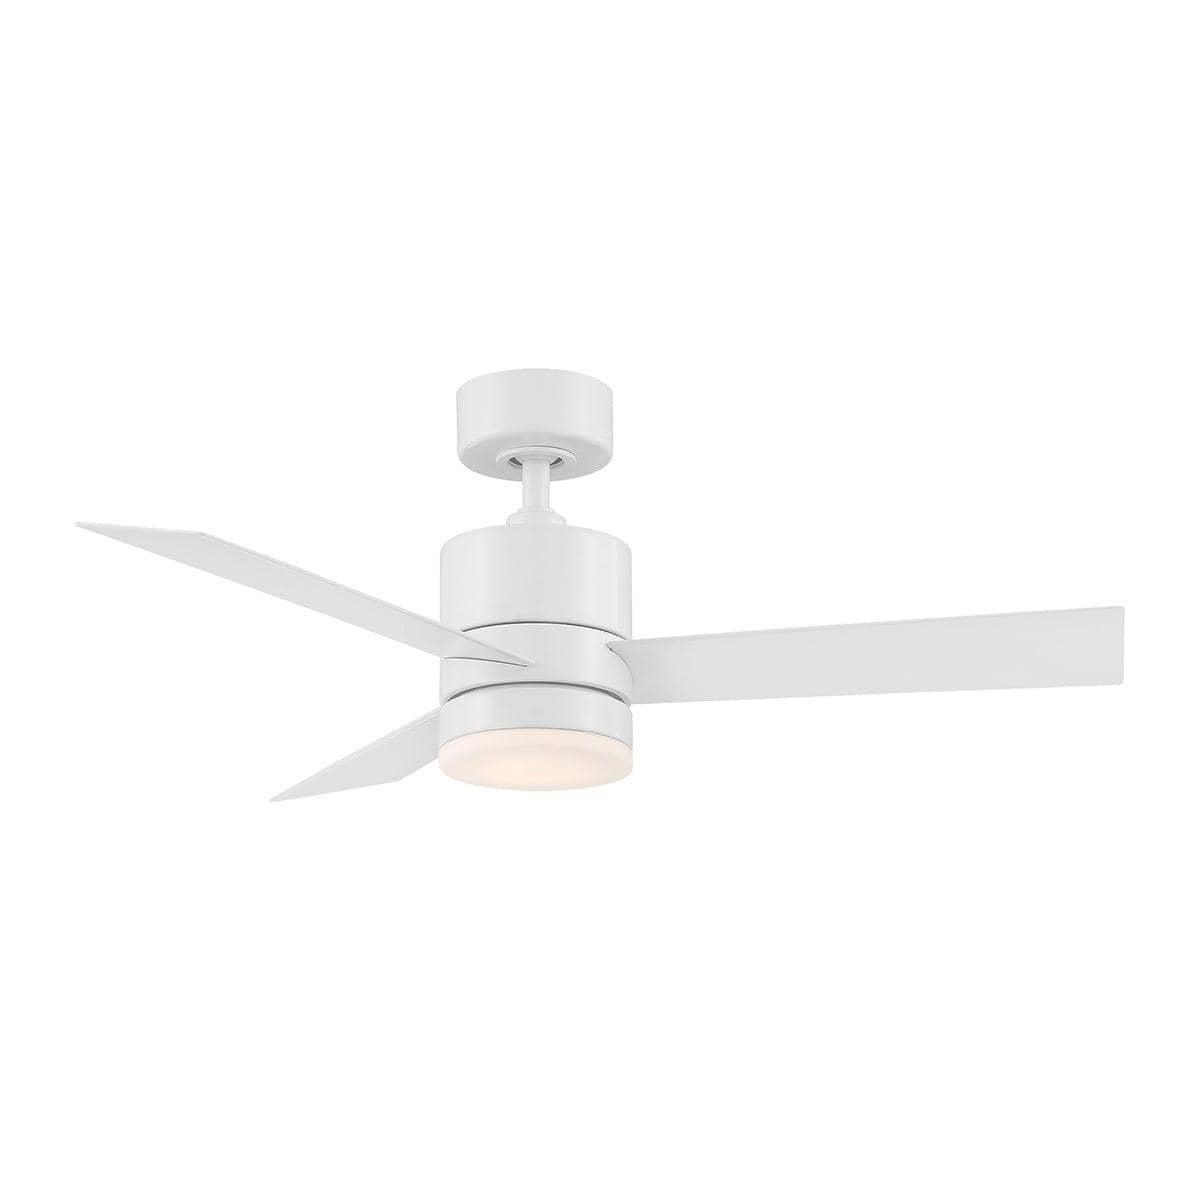 Modern Forms - Axis Ceiling Fan - FR-W1803-44L-27-MW | Montreal Lighting & Hardware